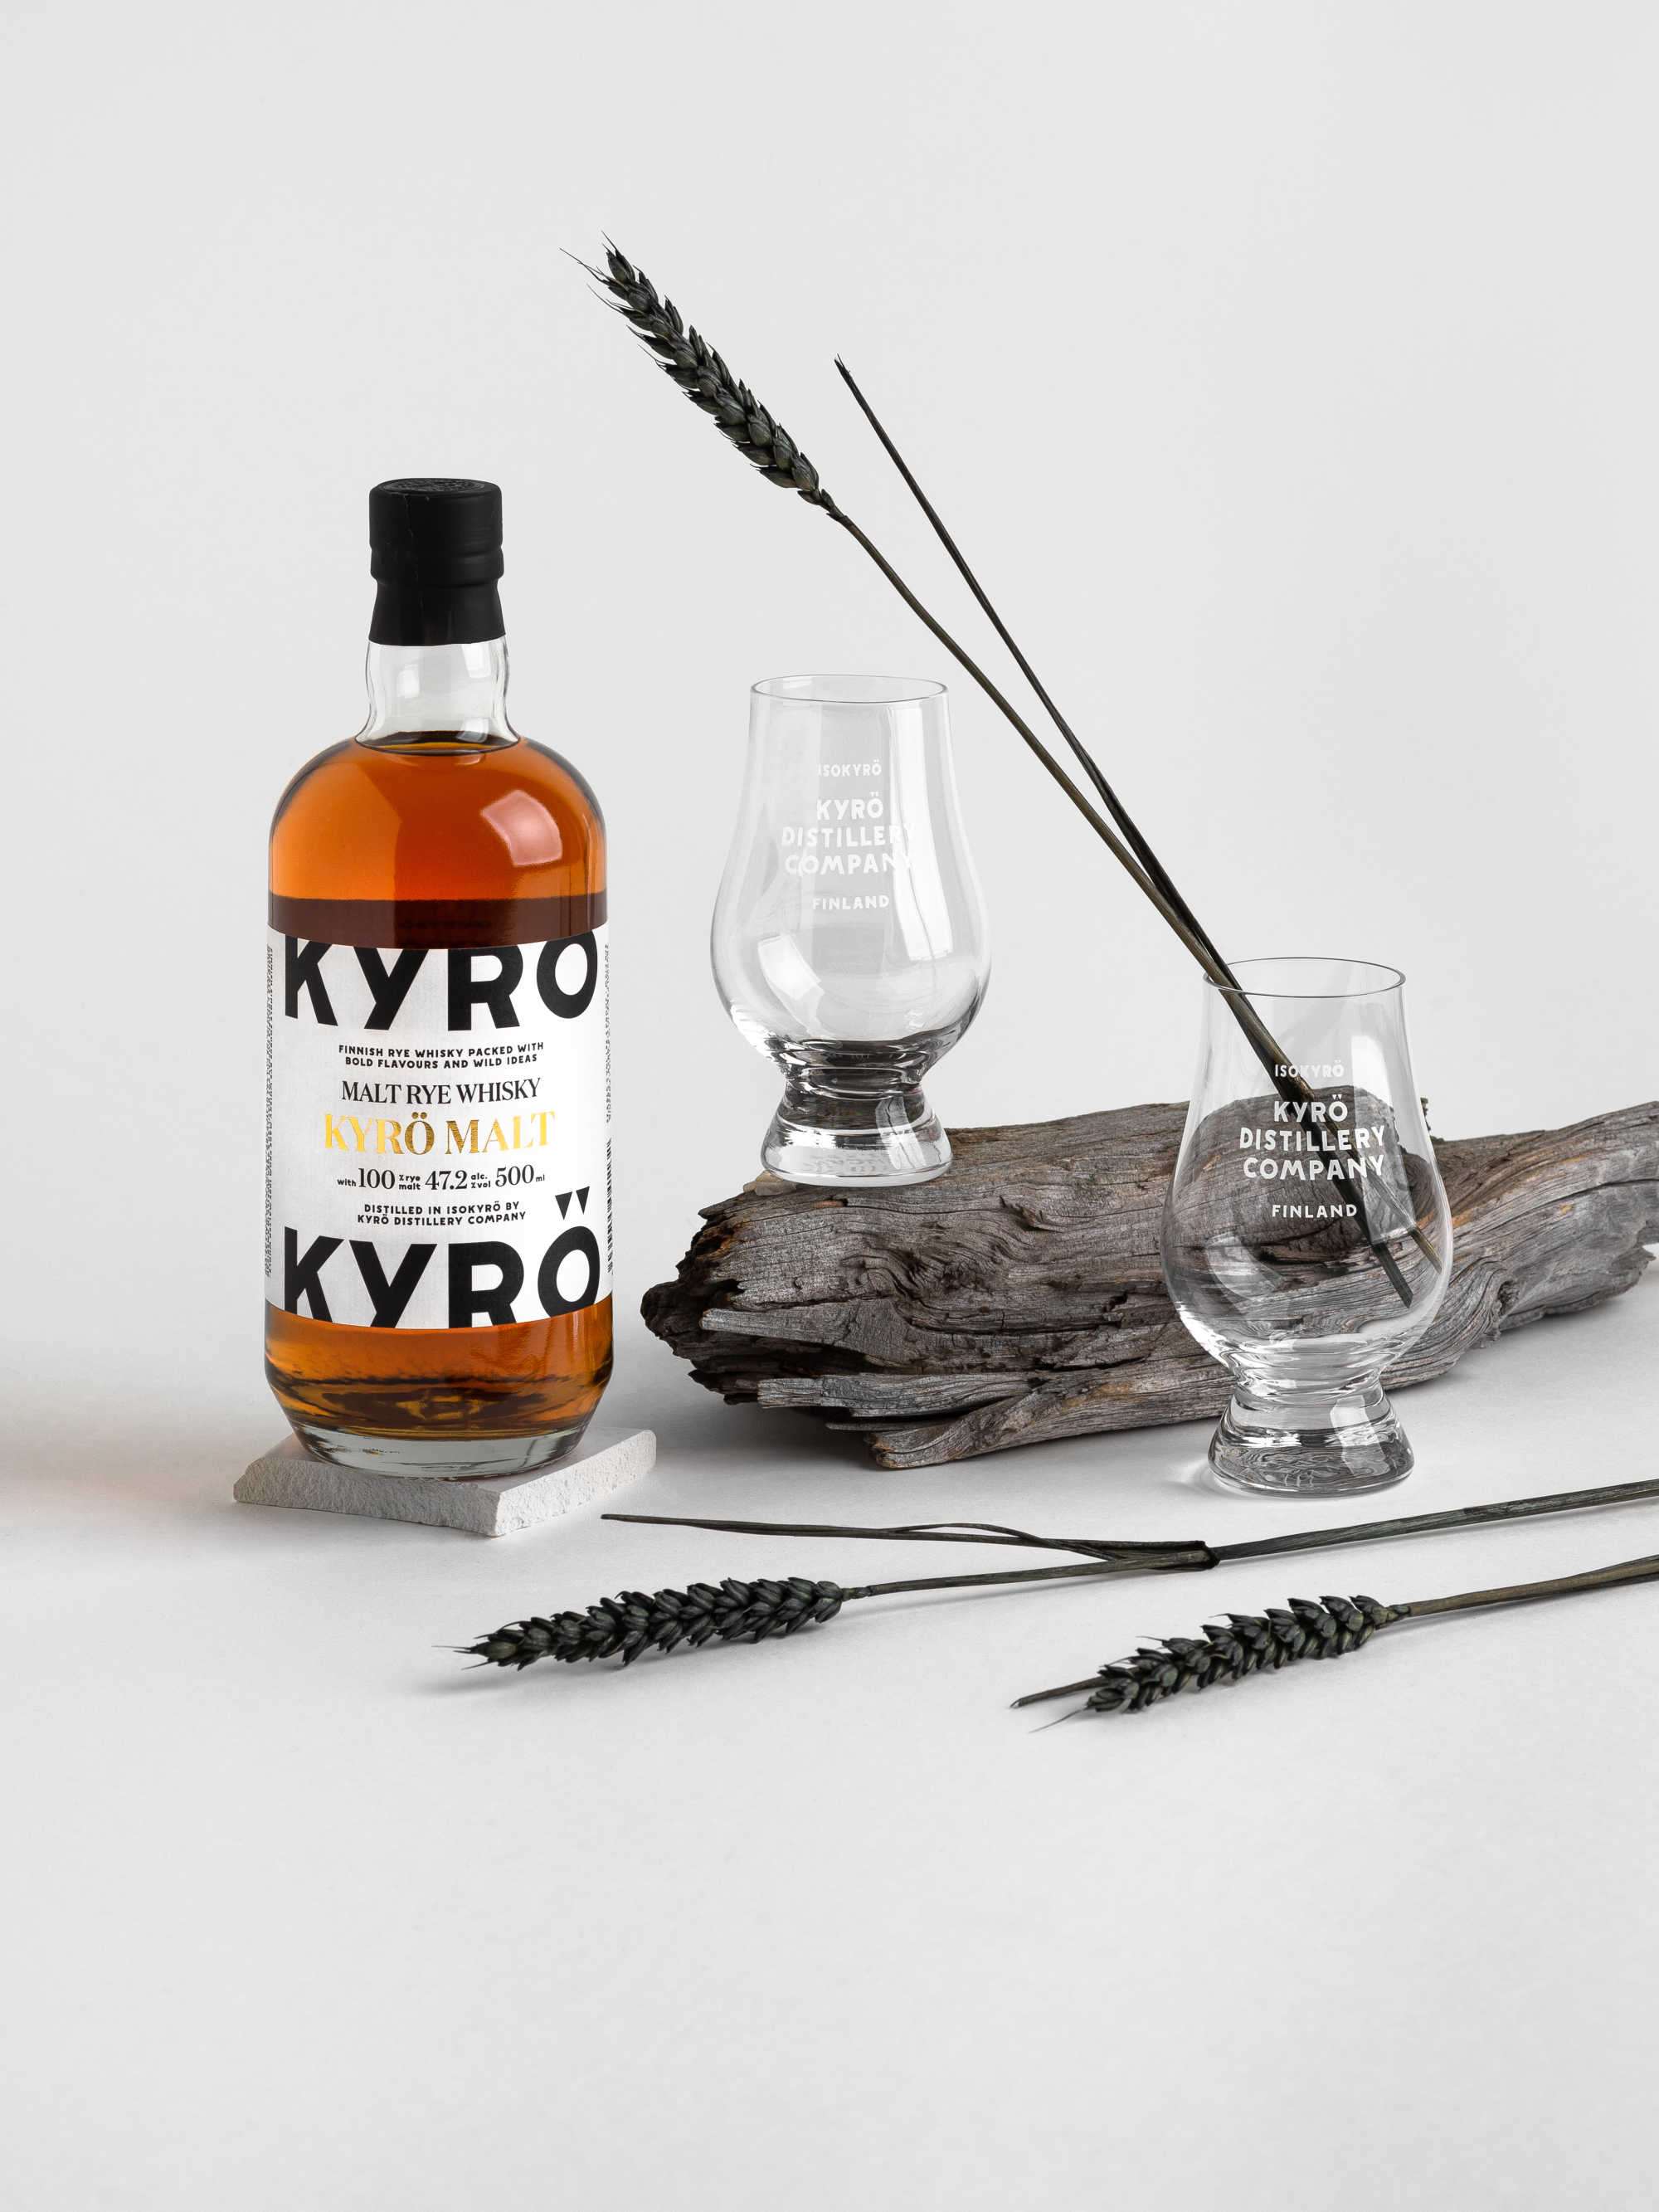 Product photo: 0,5 l bottle of award-winning, Finnish rye whisky from Kyrö Distillery Company and two tasting glasses. 